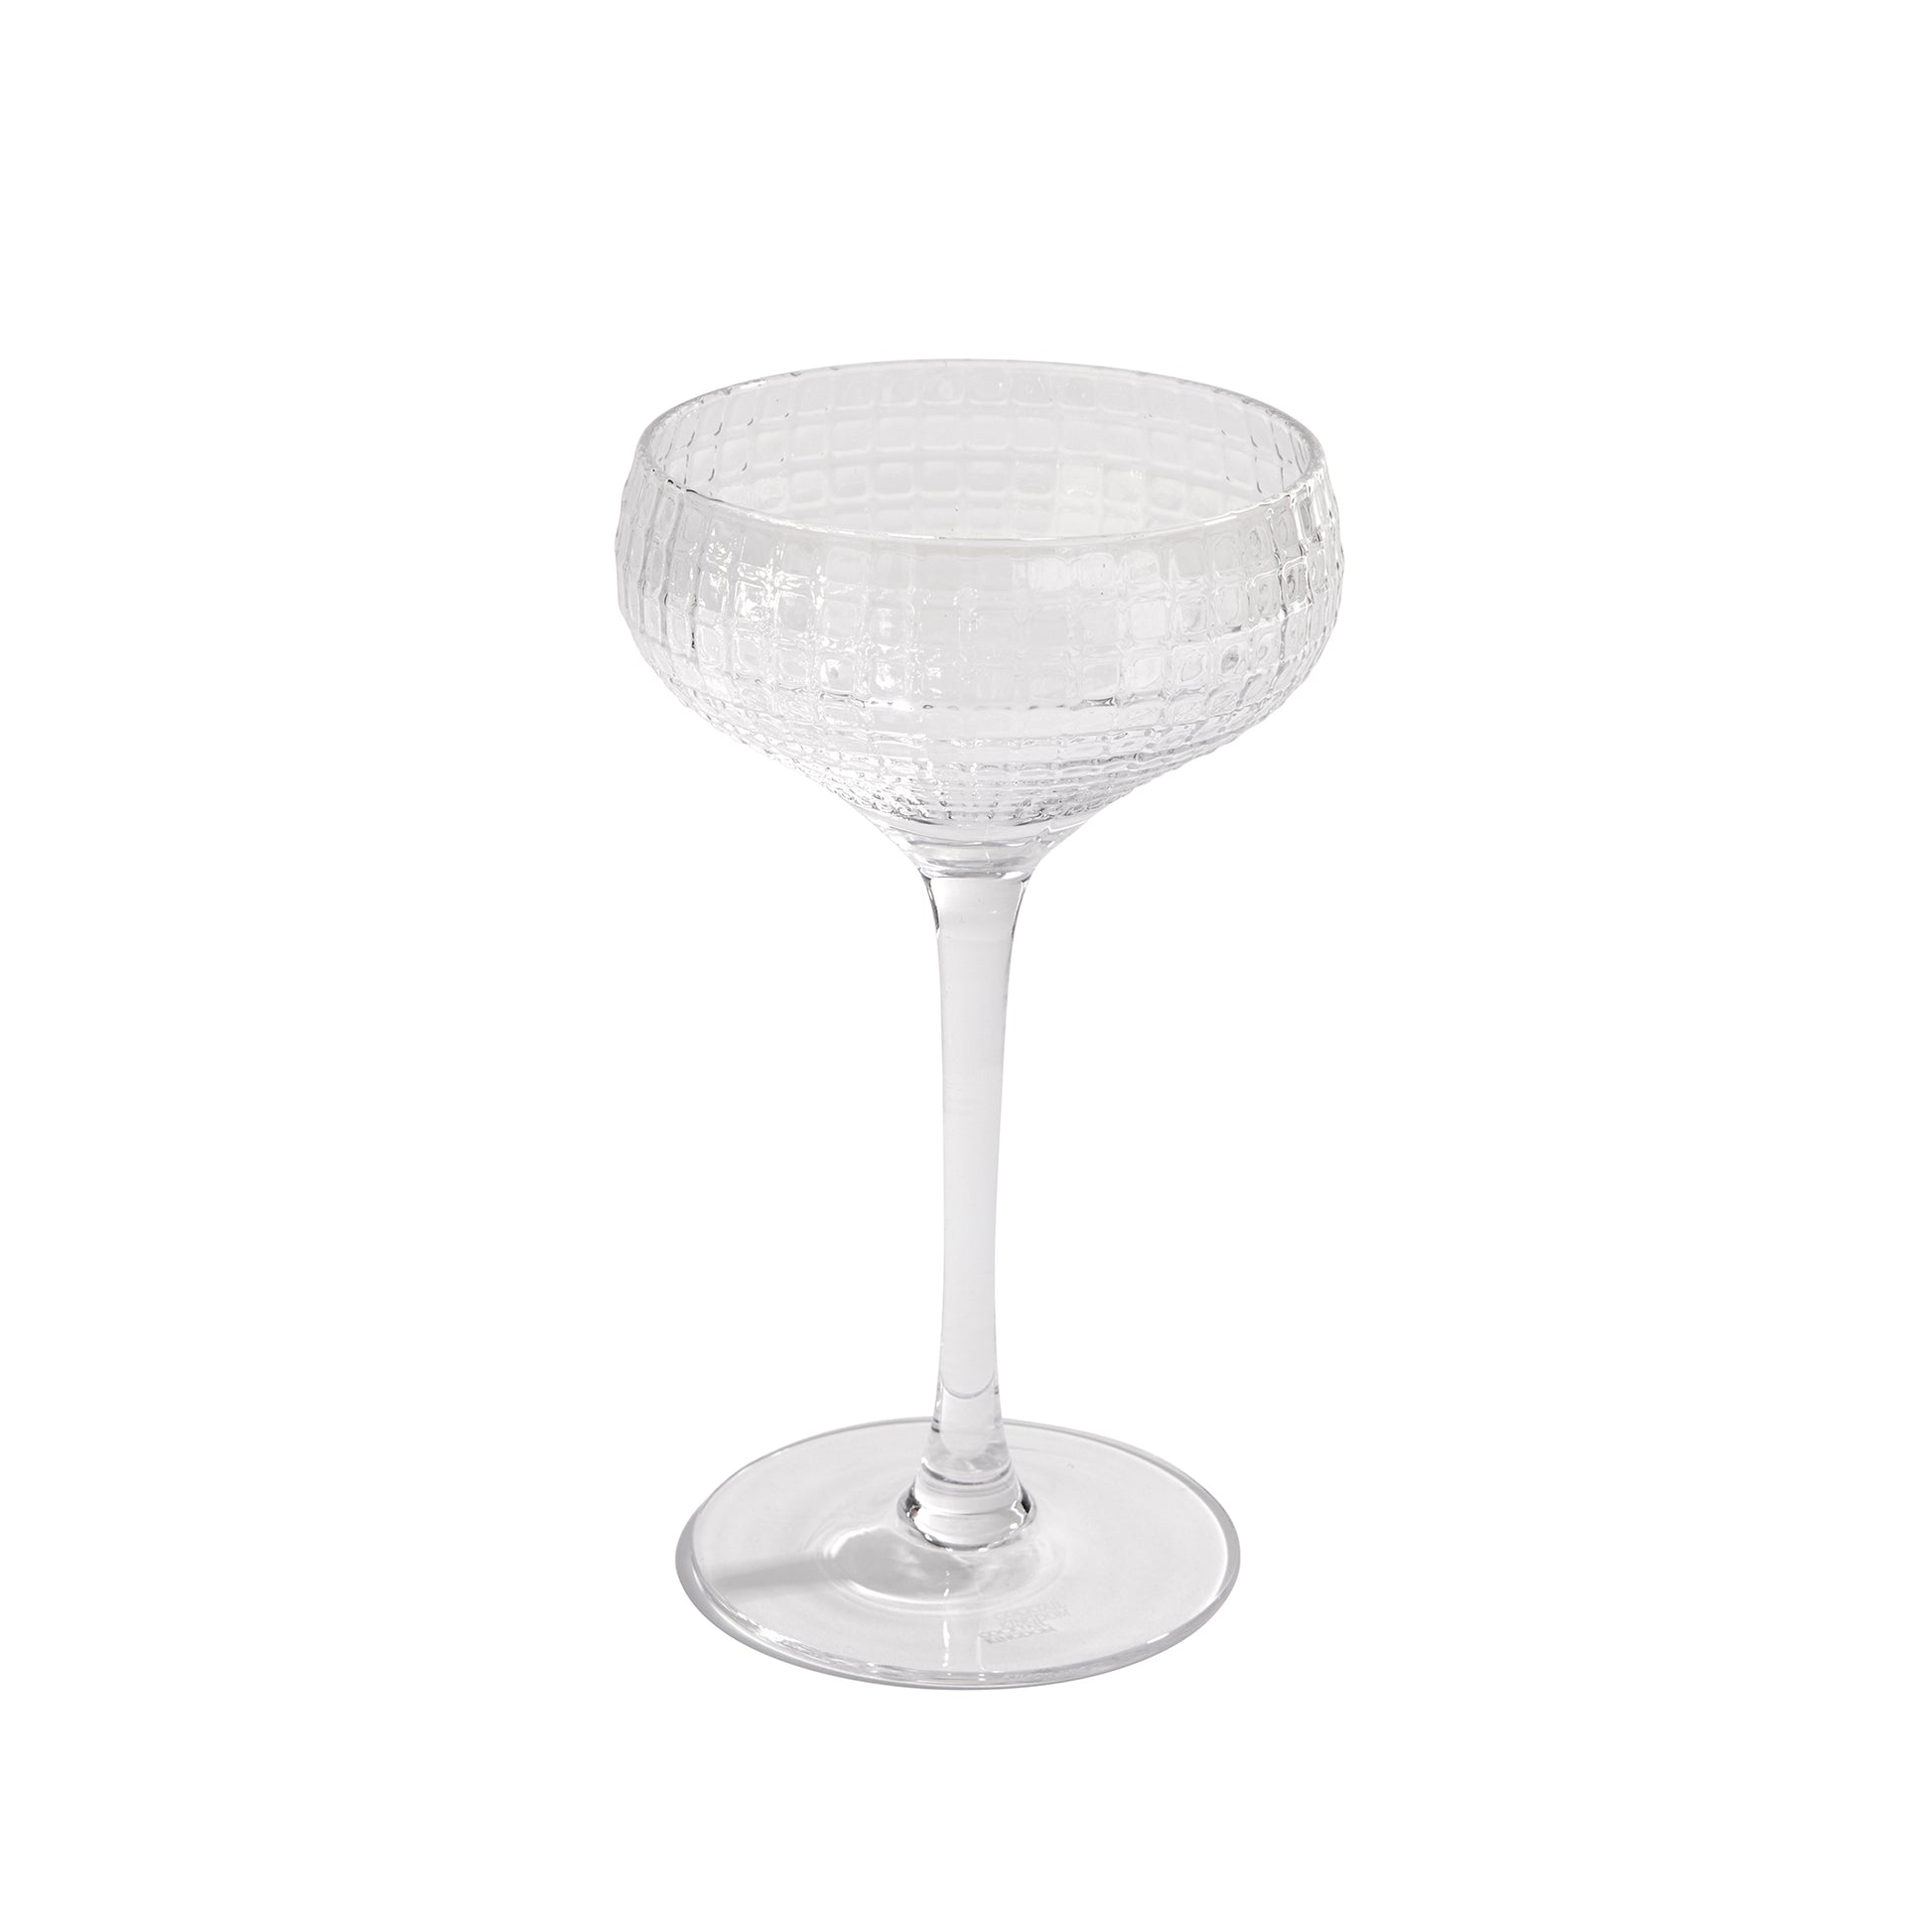 BEATRICE COUPE GLASS - 6.5oz (192ml) / PACK OF 6